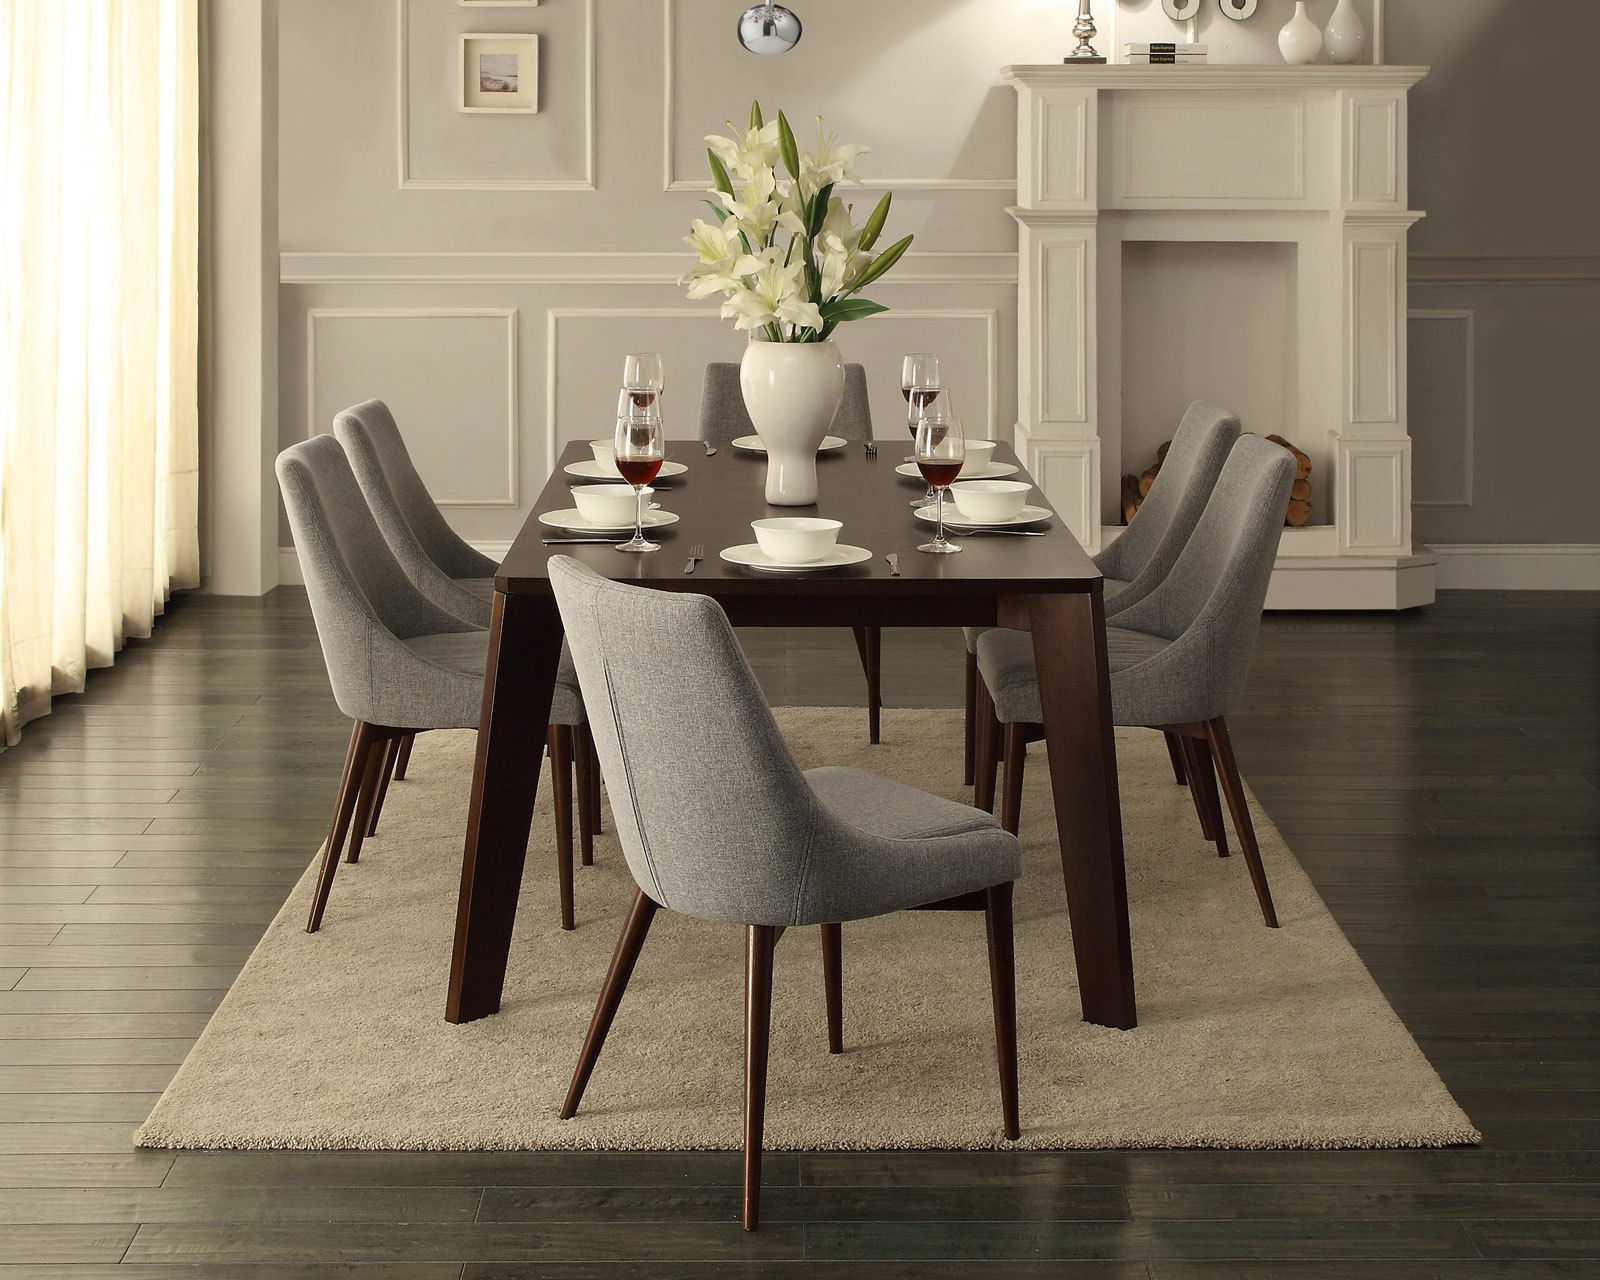 modern swvel dining room chairs